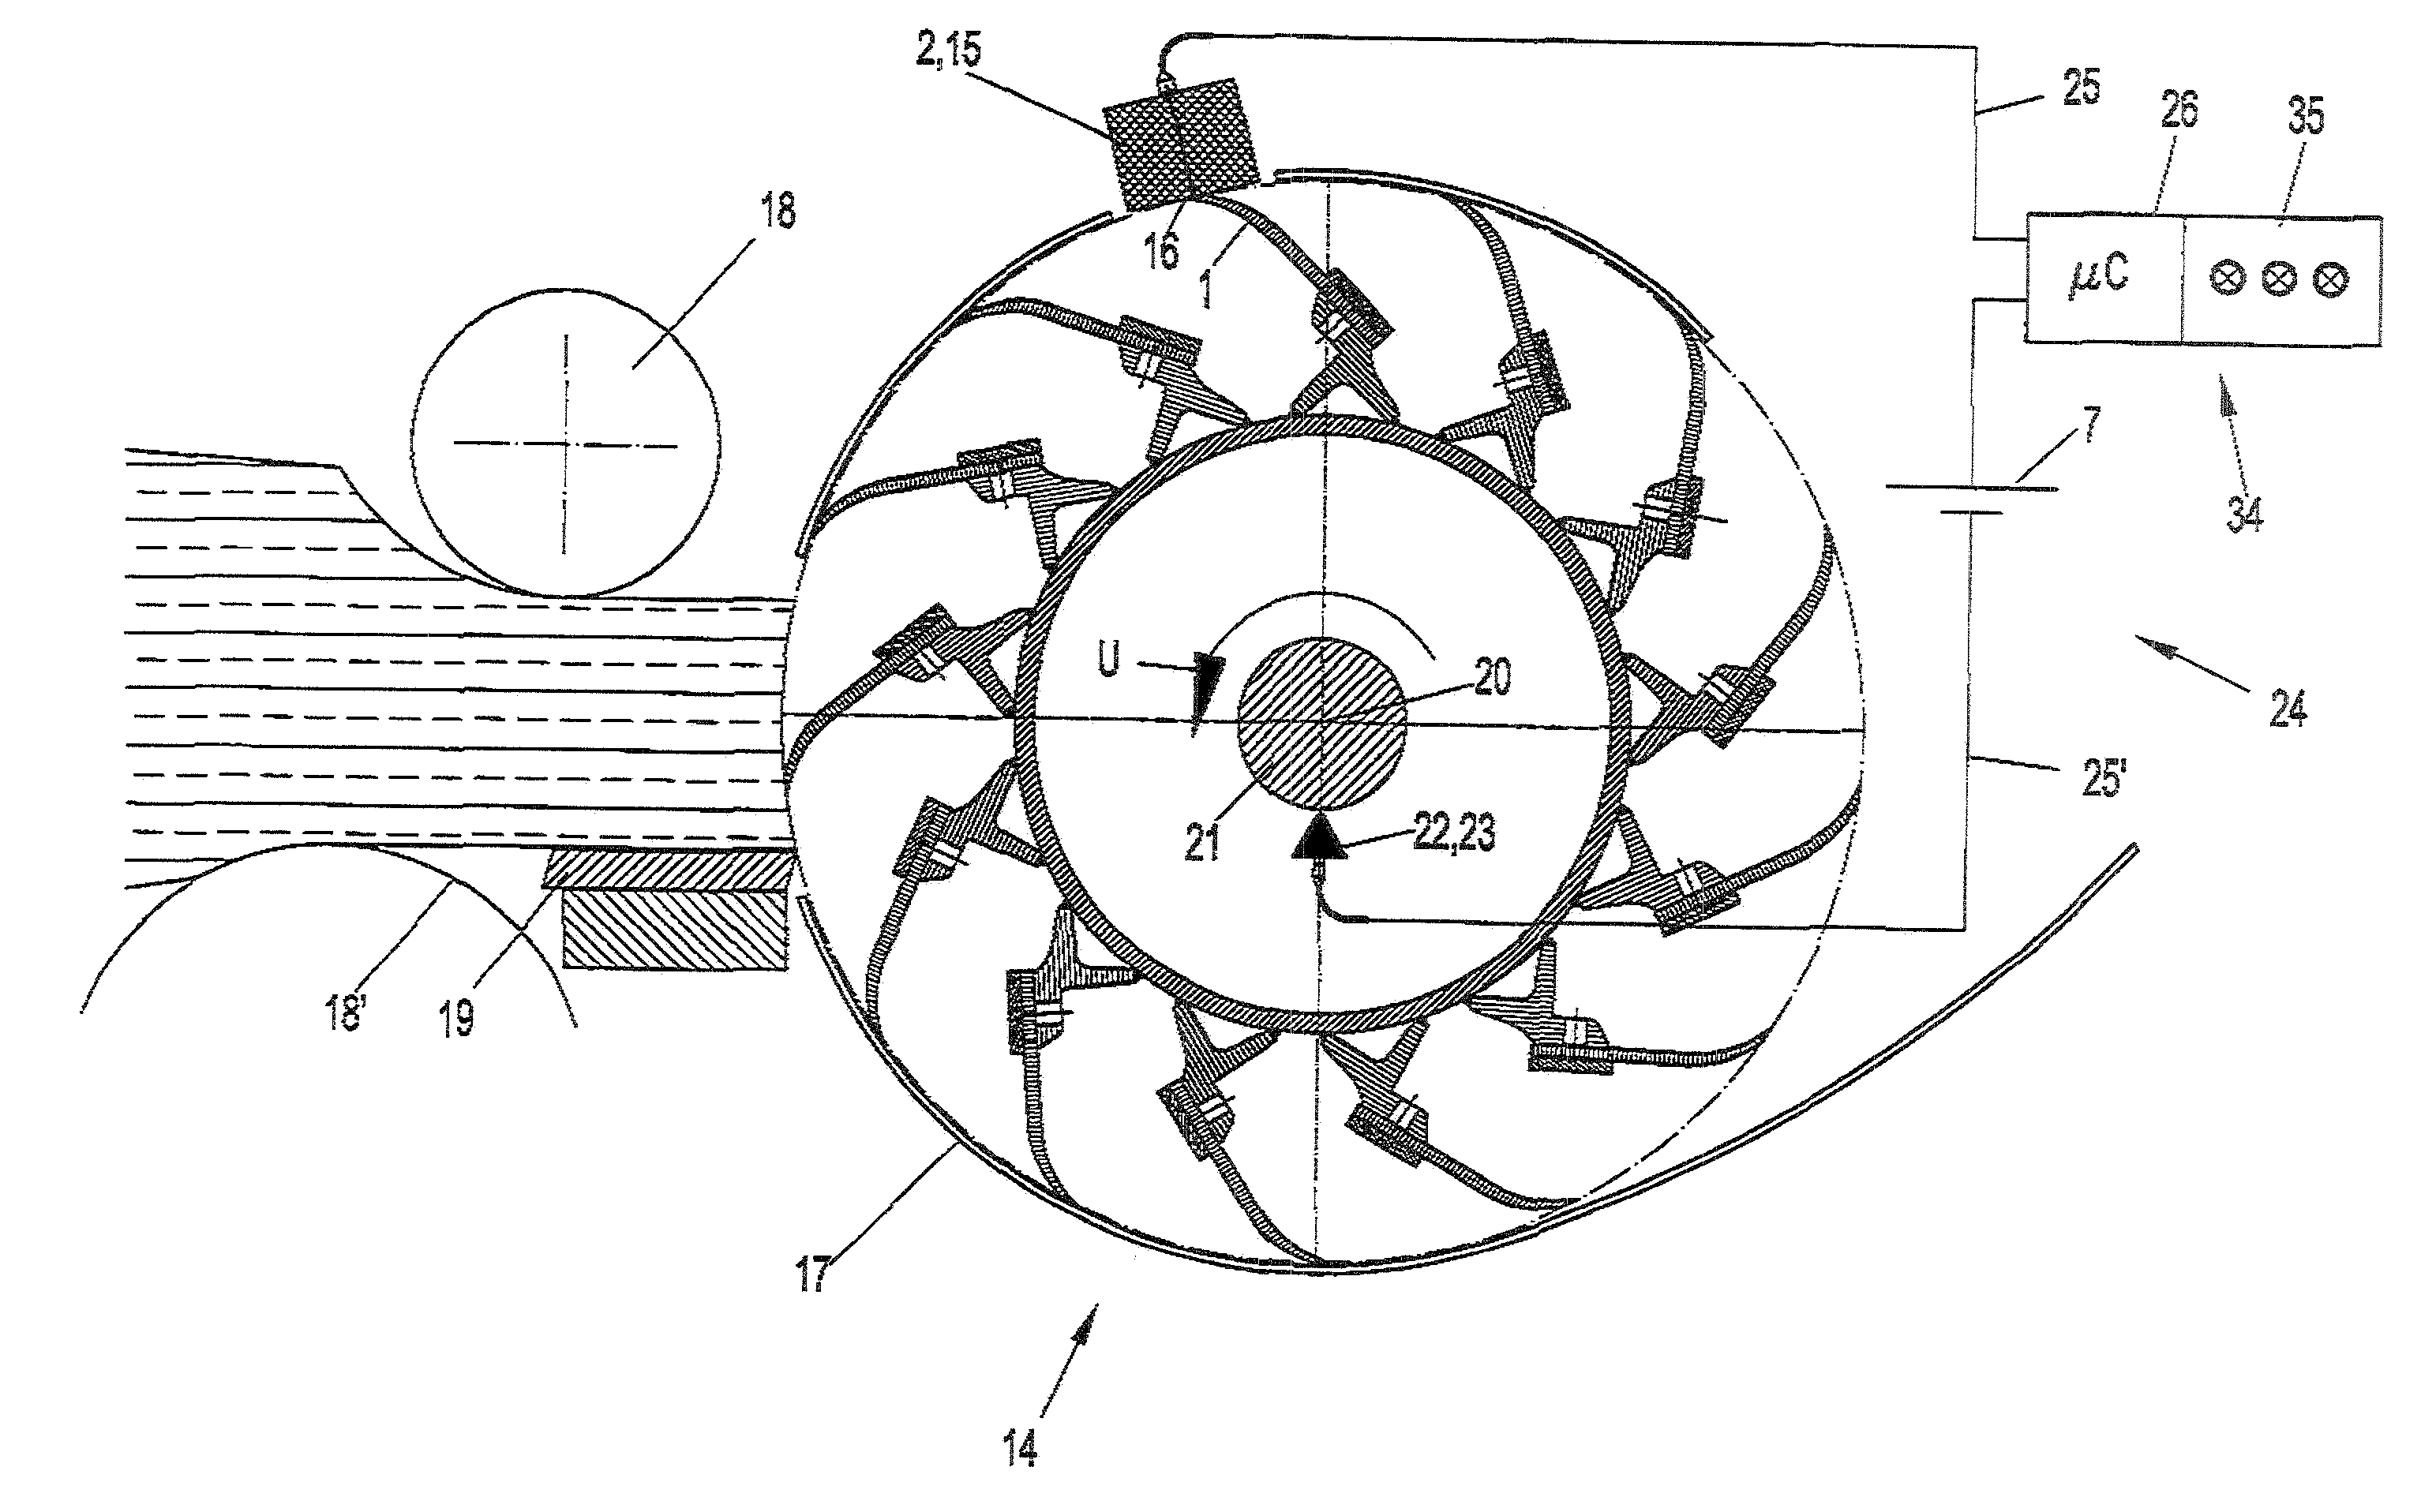 Method for determining the sharpness of cutting edges of chopper blades